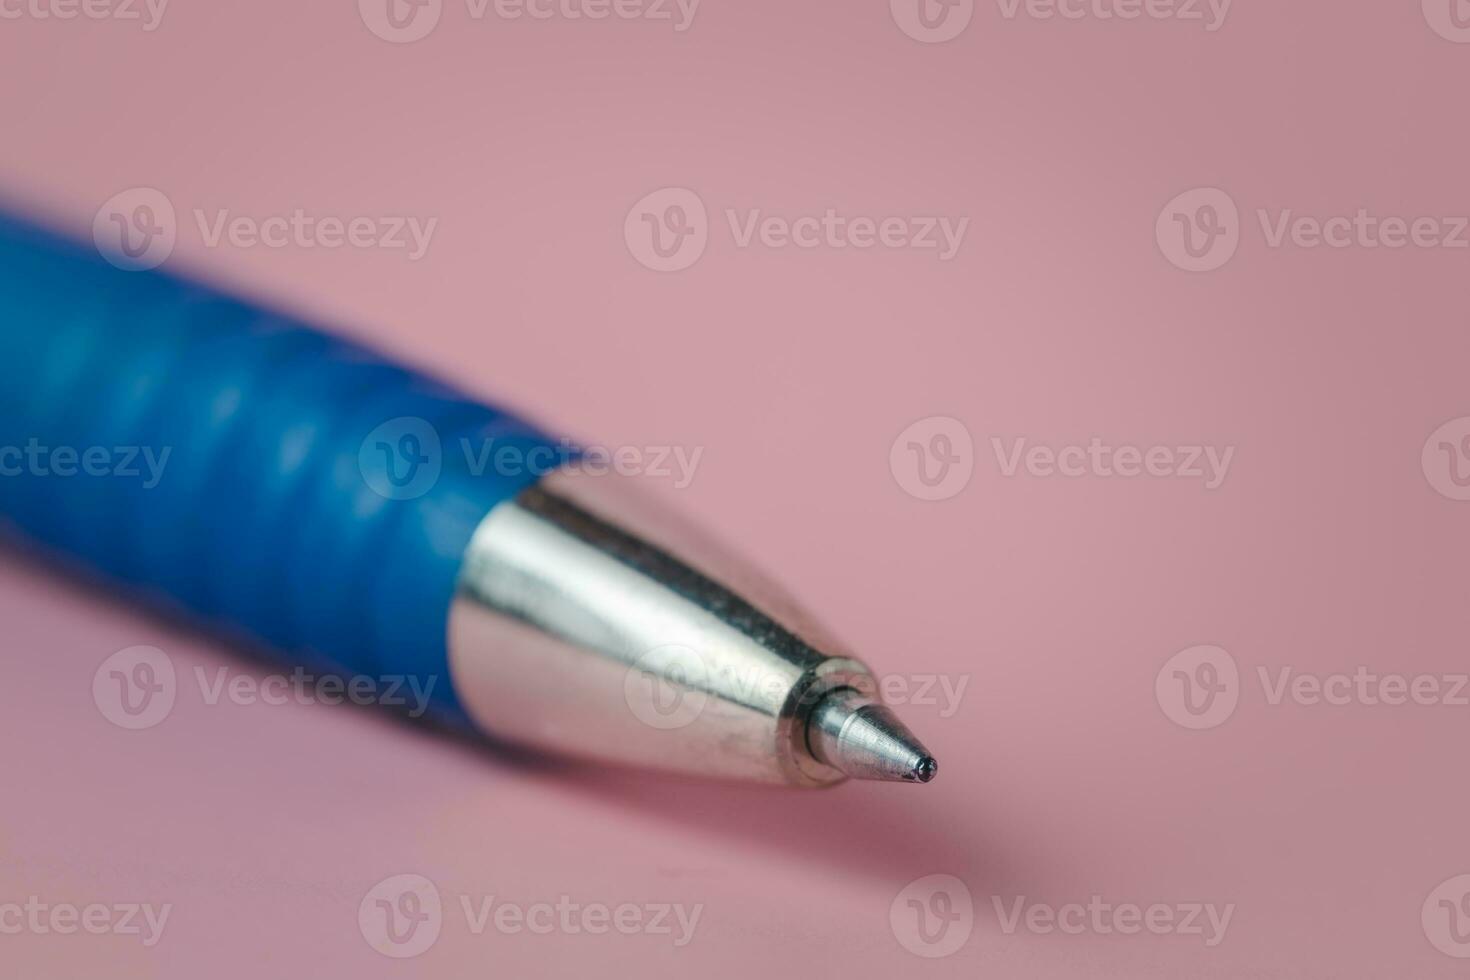 Closeup image of the pointed end part of a pen on pink background photo